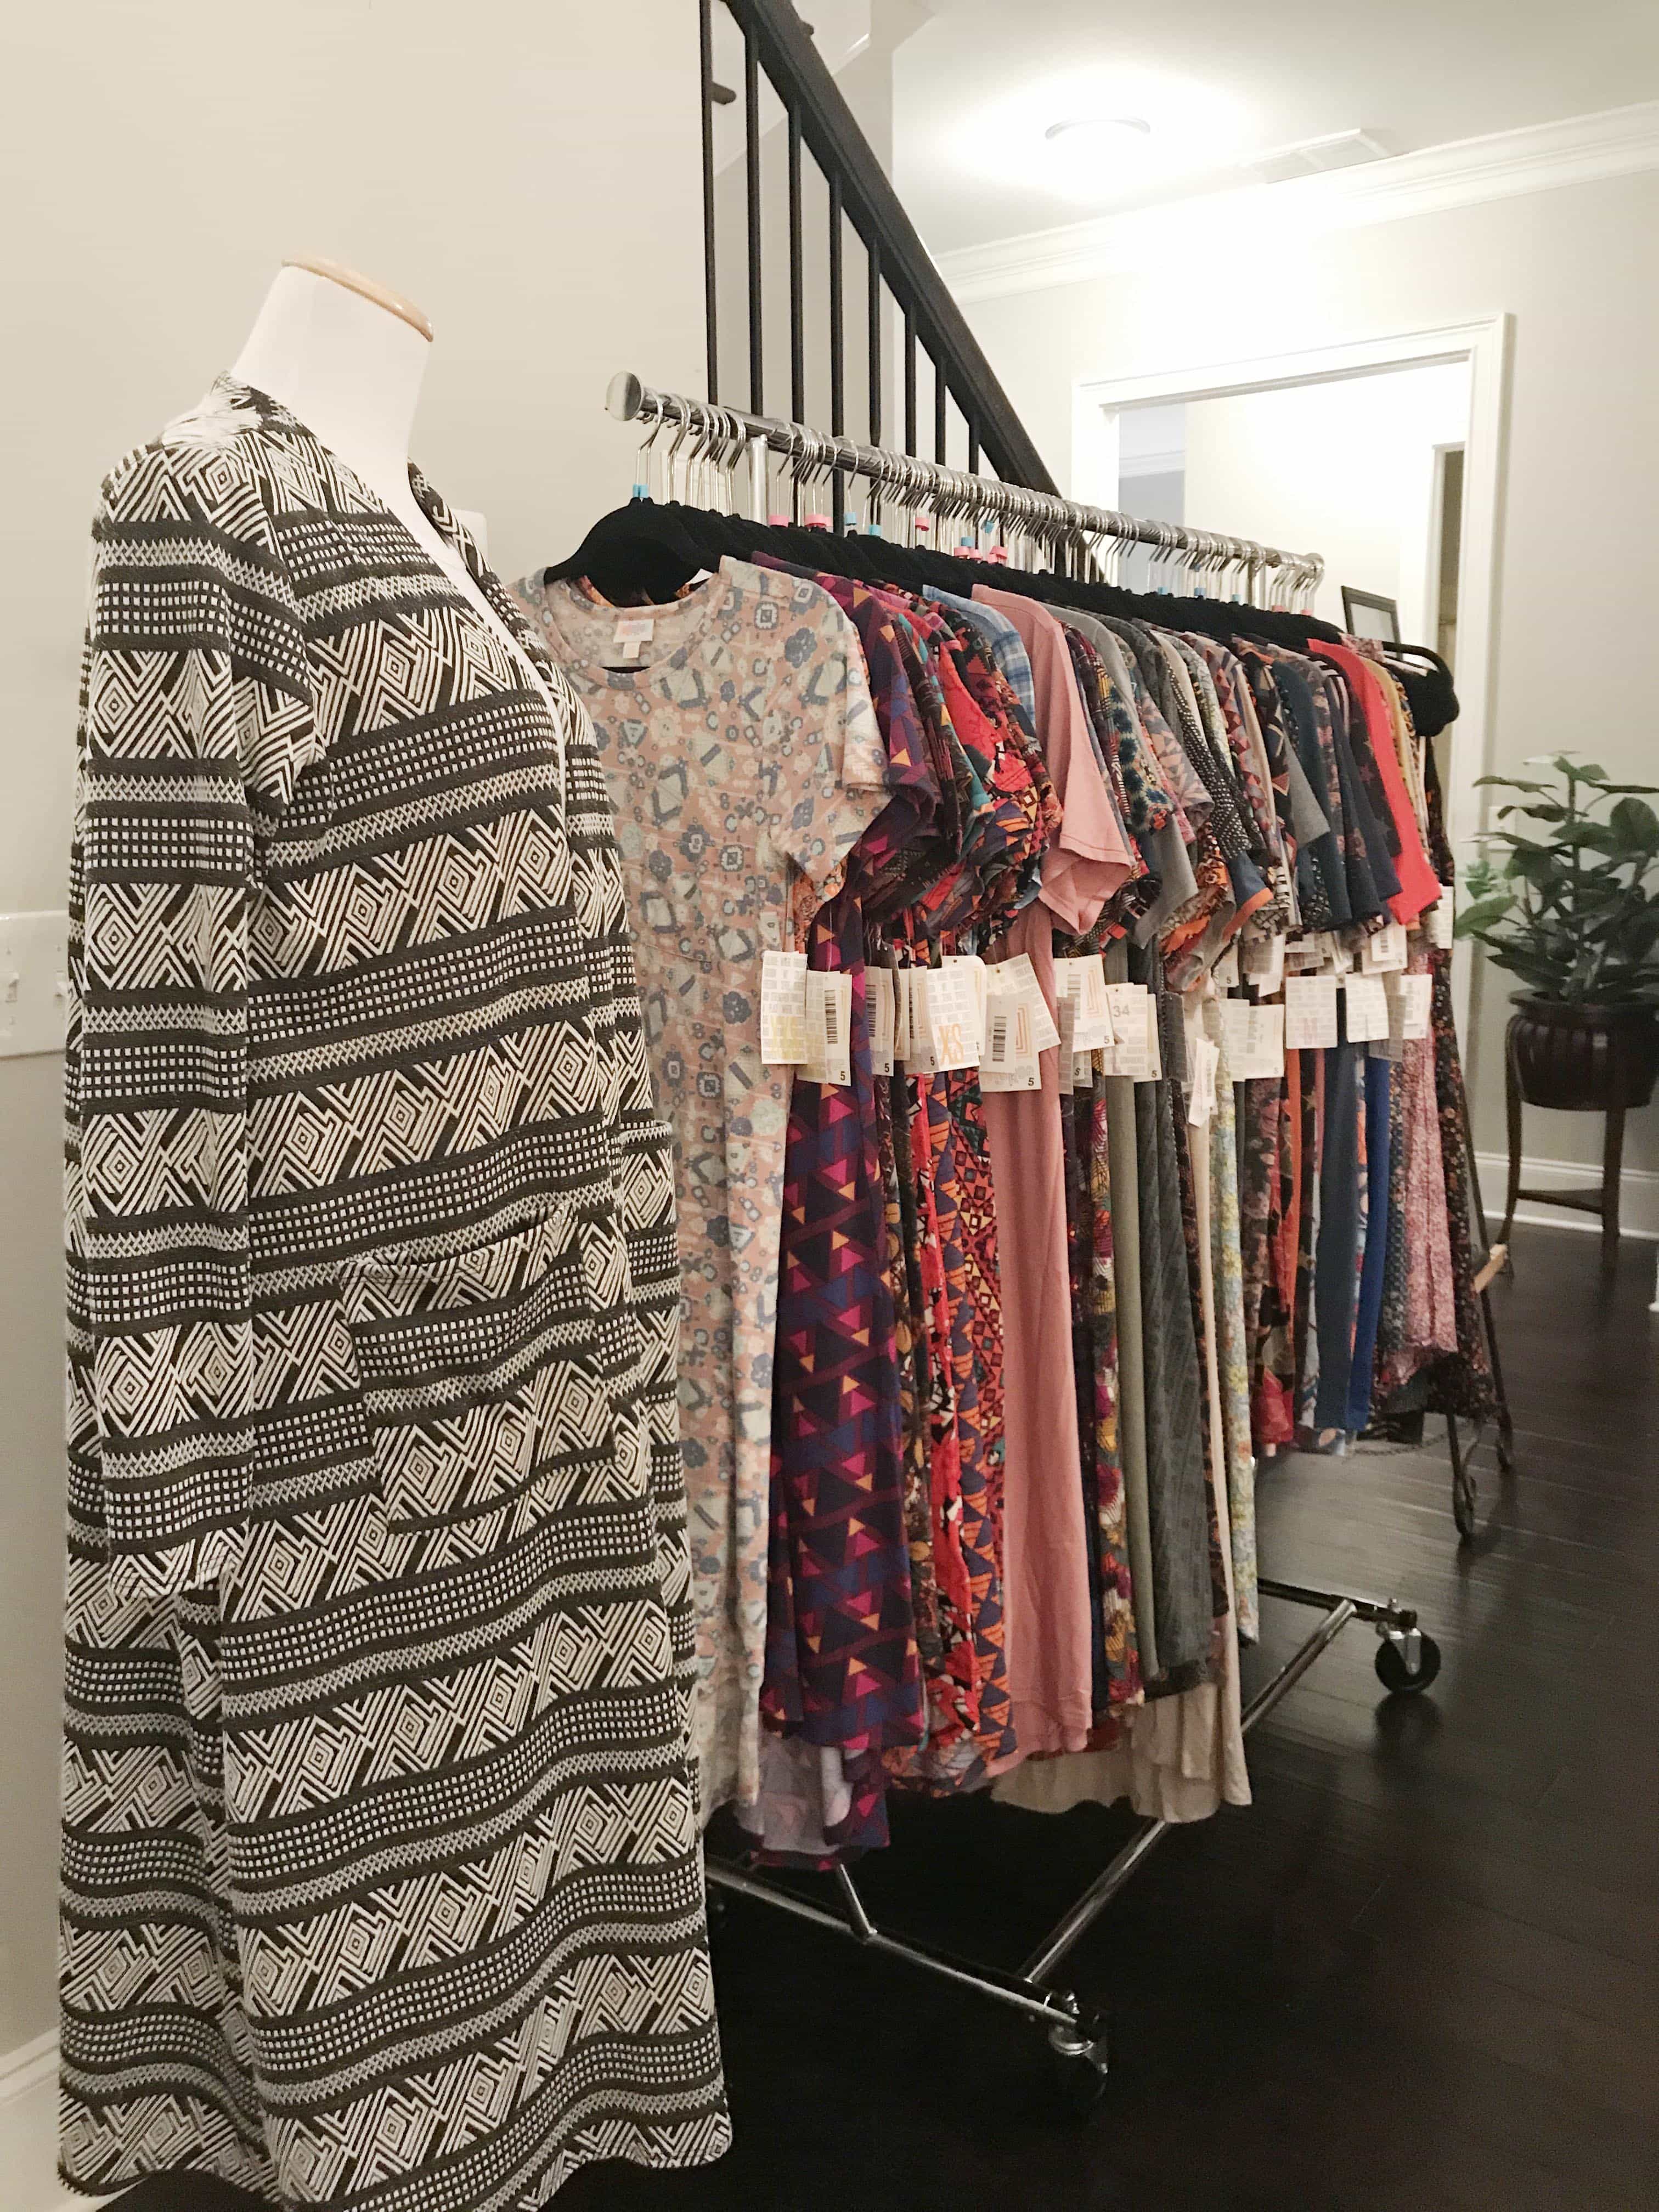 LuLaRoe - Ryane means royalty! To honor the name we will call it the queen  of our wardrobes because it's the perfect dress for keeping us warm or  adding a little mystery